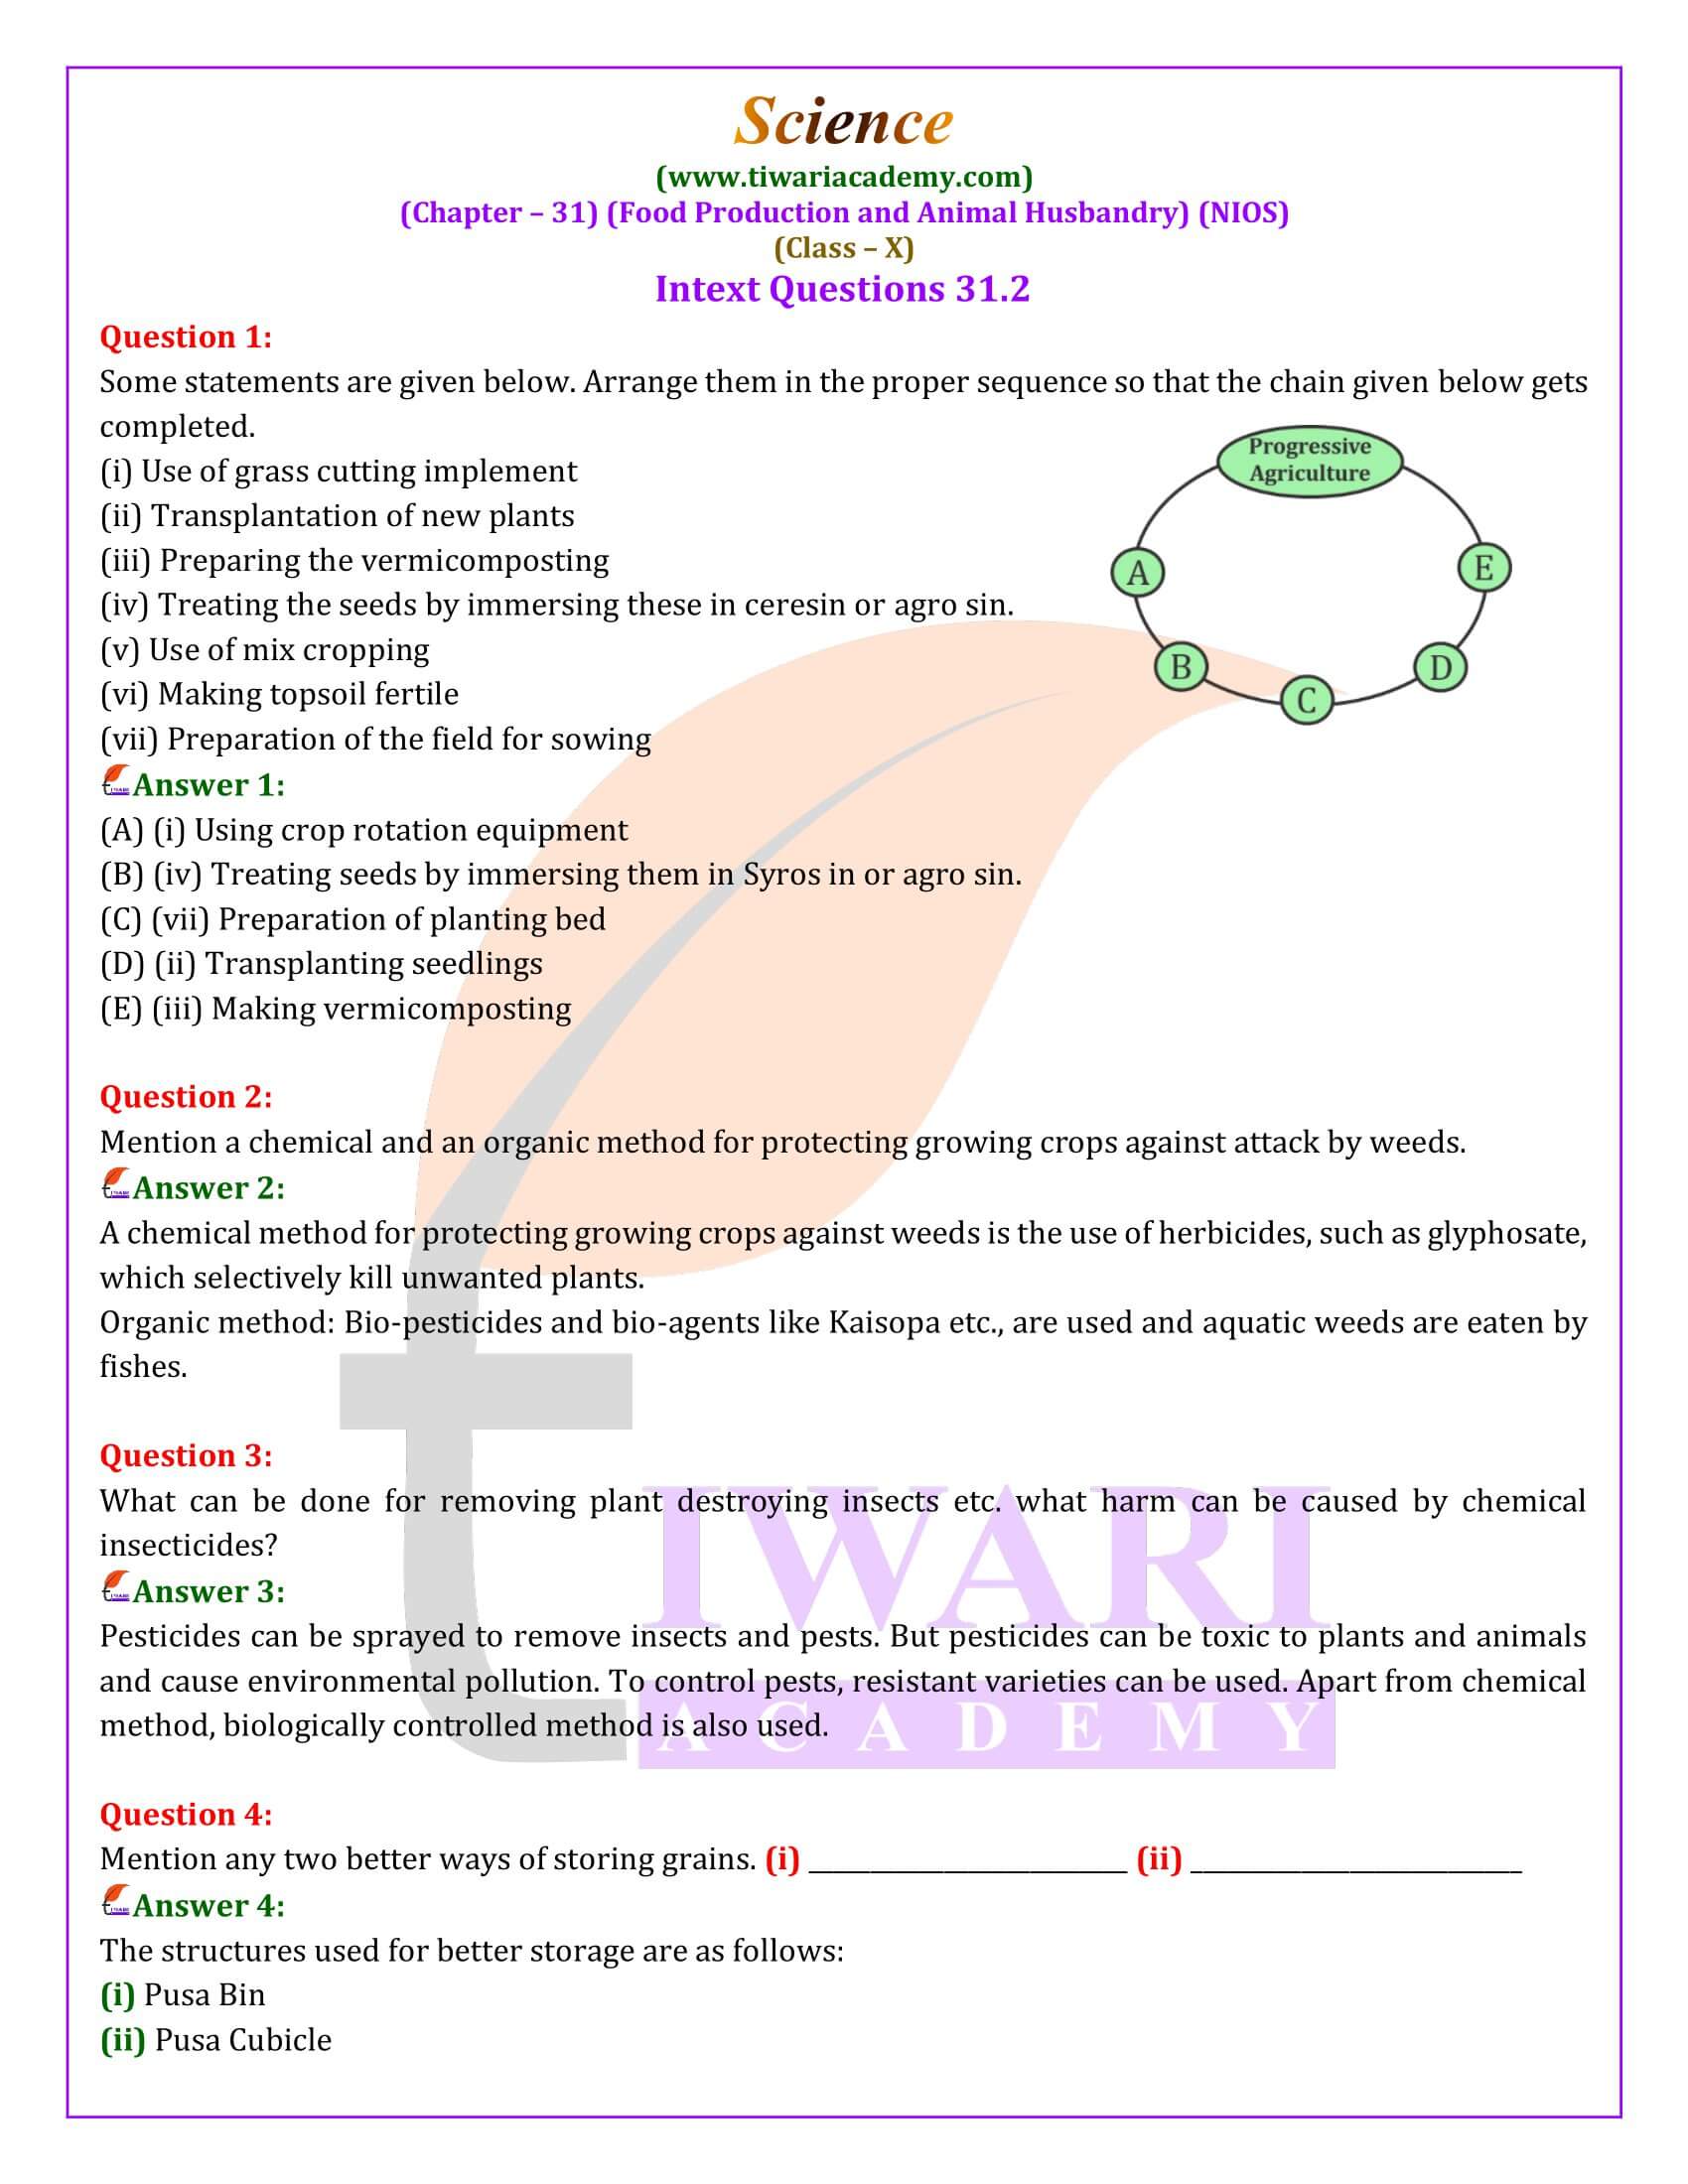 NIOS Class 10 Science Chapter 31 Food Production Solutions